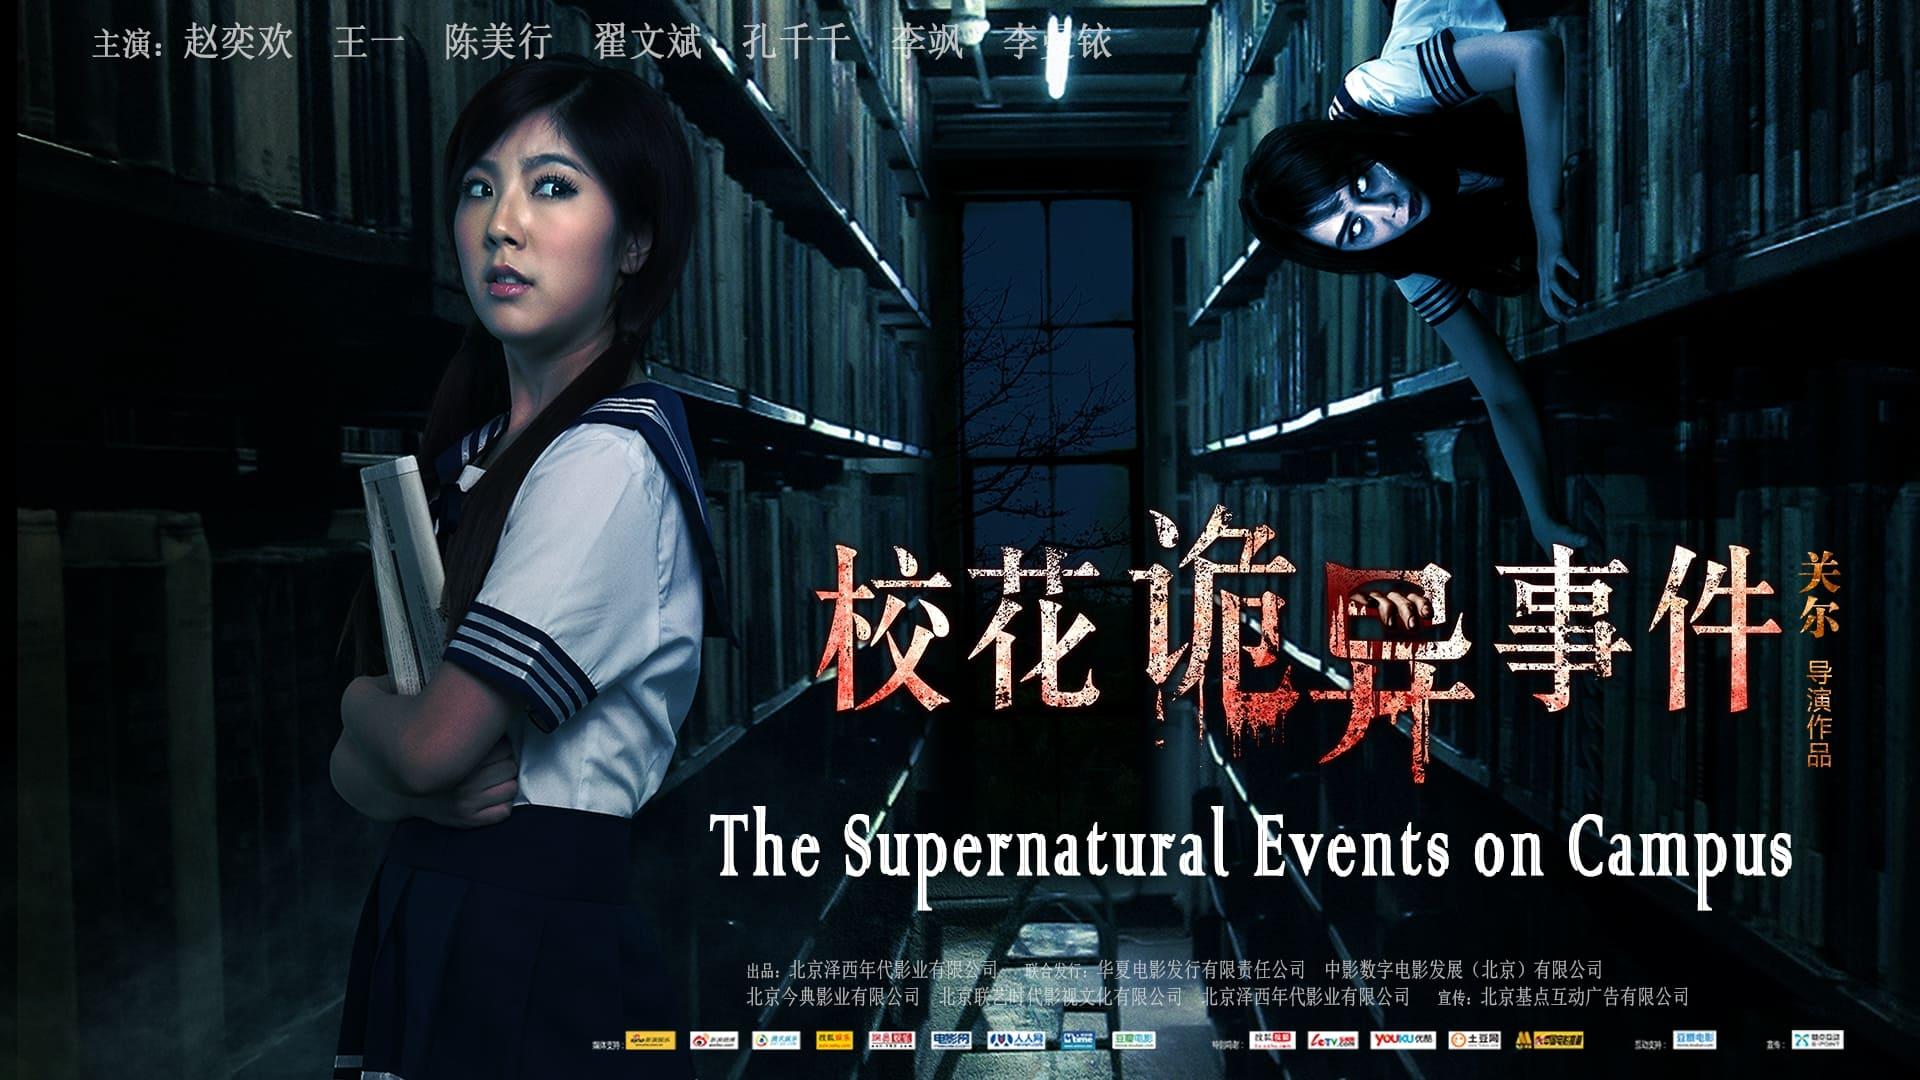 The Supernatural Events on Campus backdrop